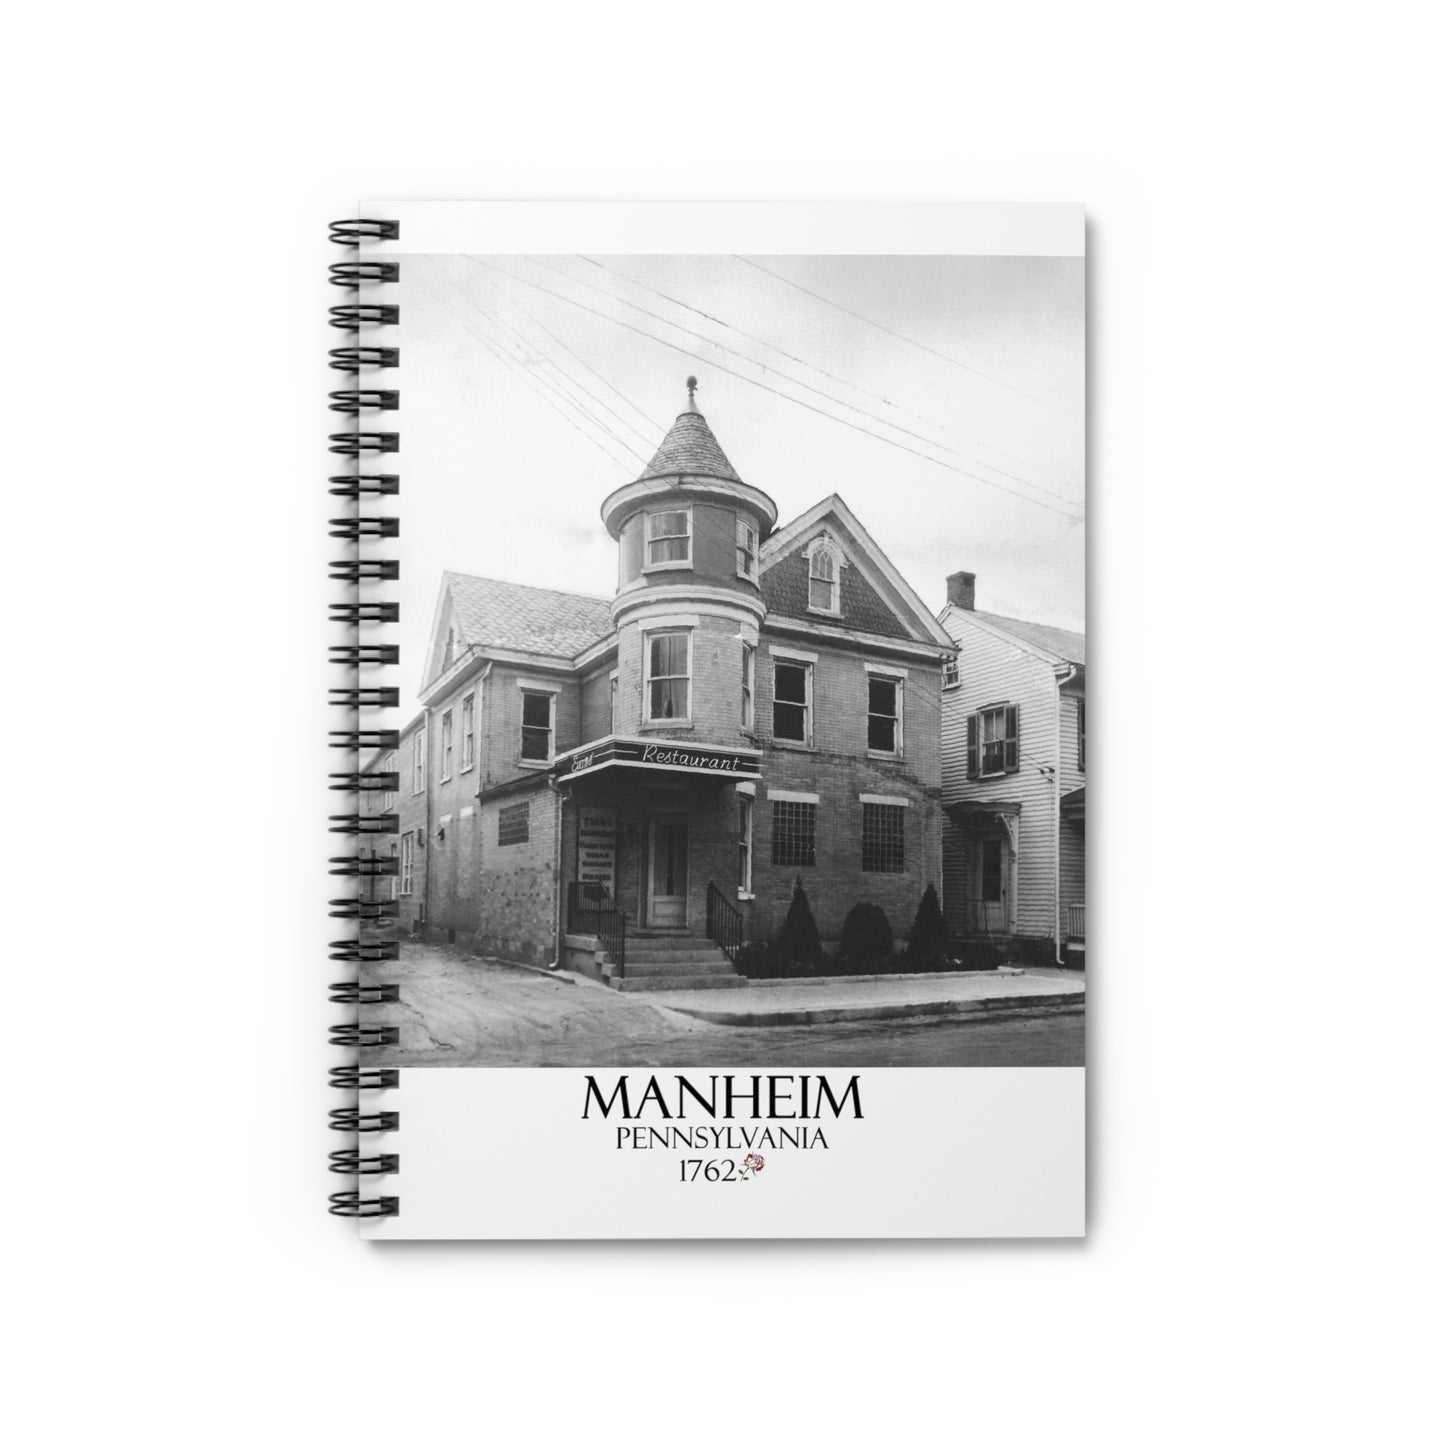 A notebook with an old historical photograph of a restaurant in Manheim Pennsylvania.